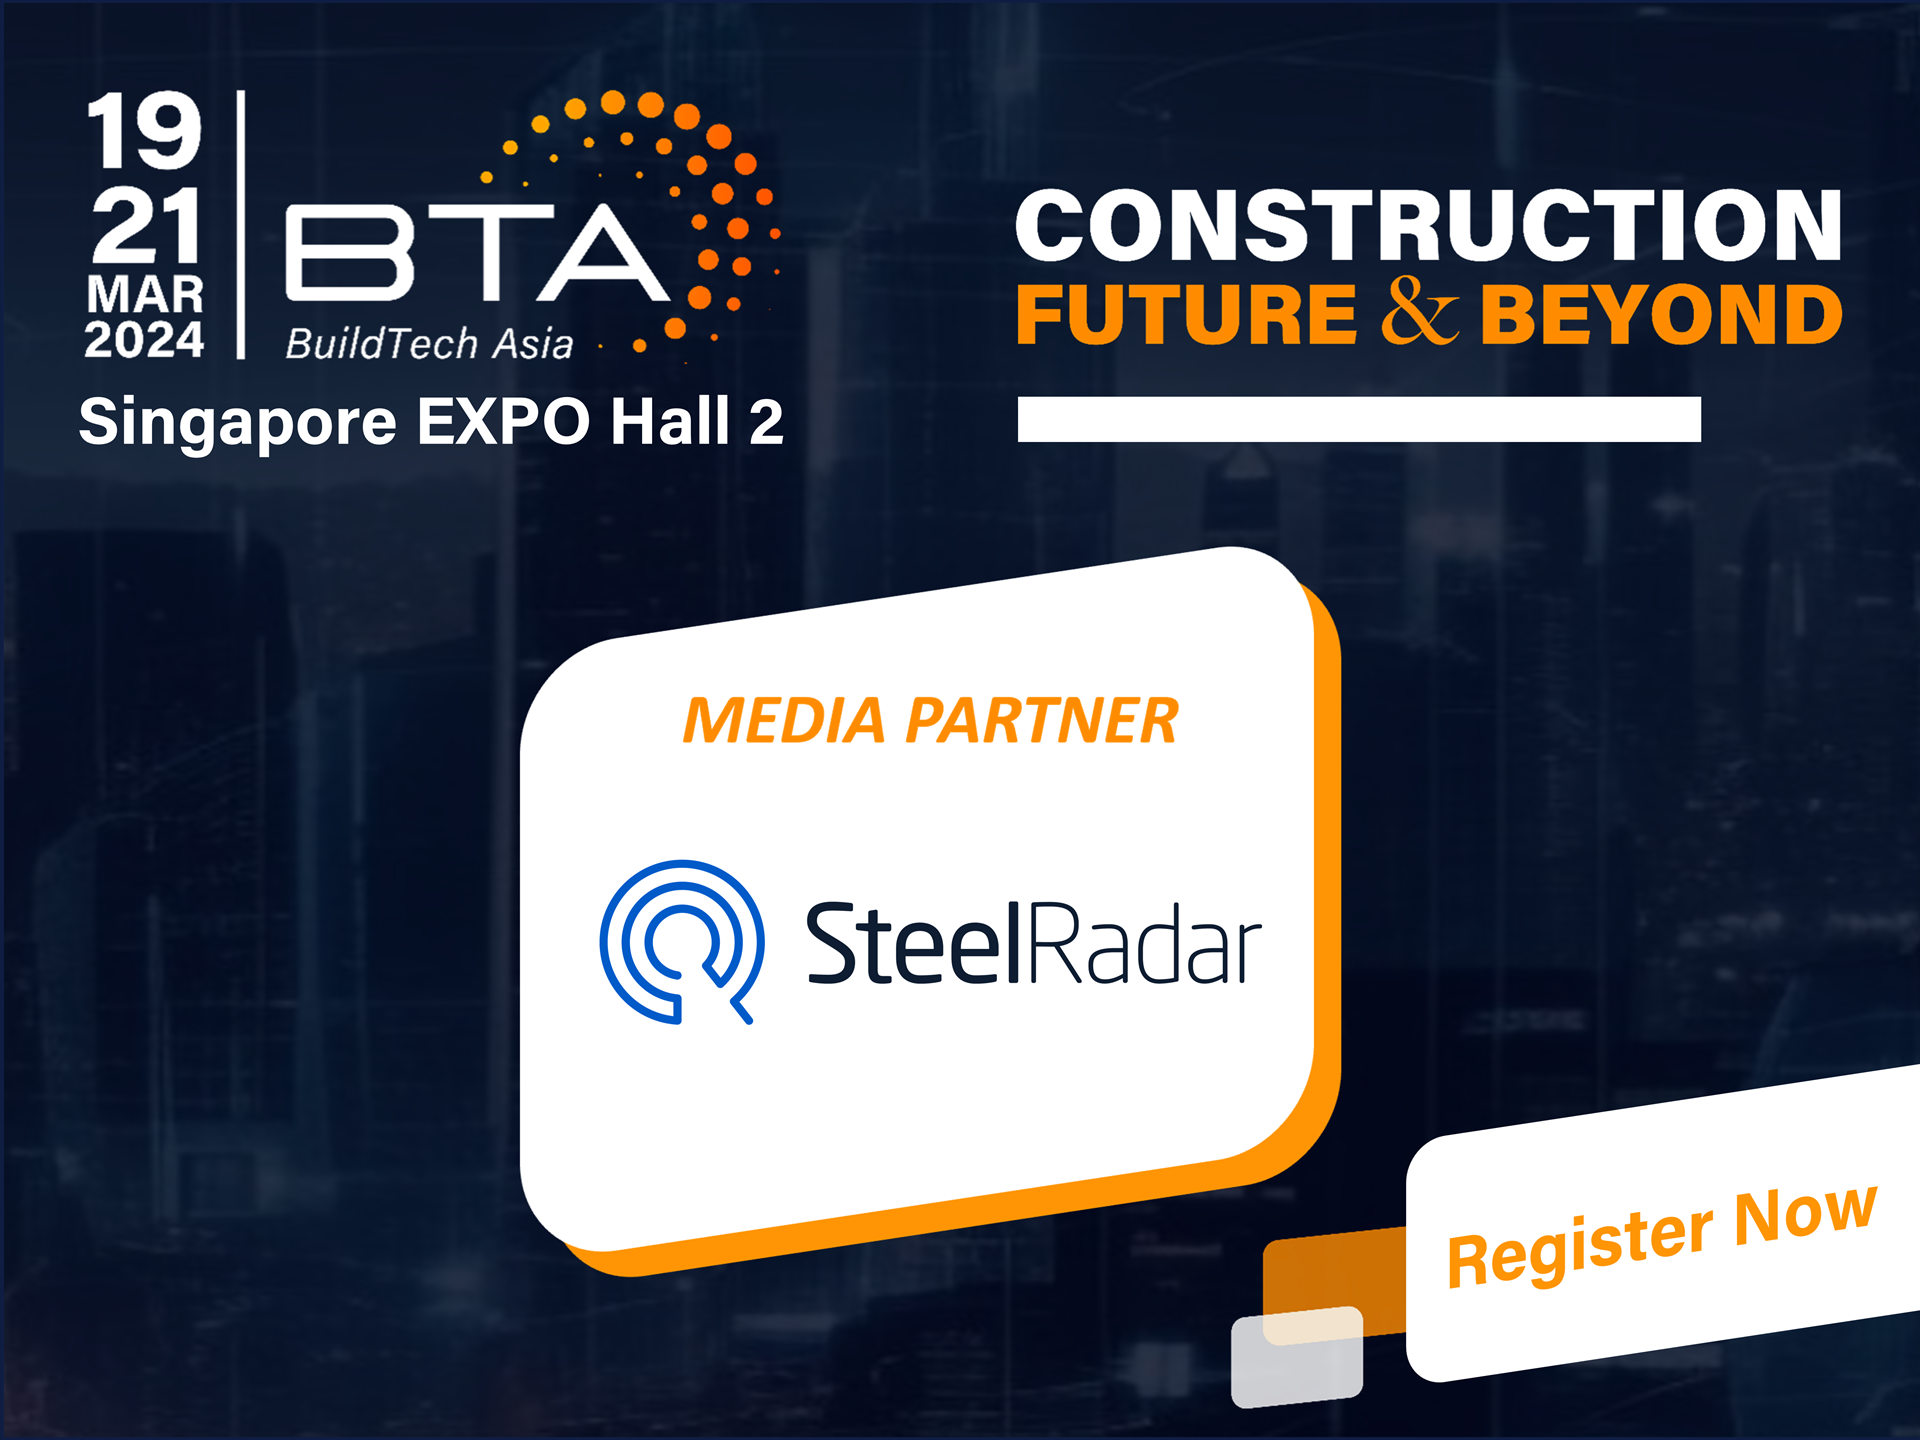 BuildTech Asia will take place on March 19 - 21, 2024